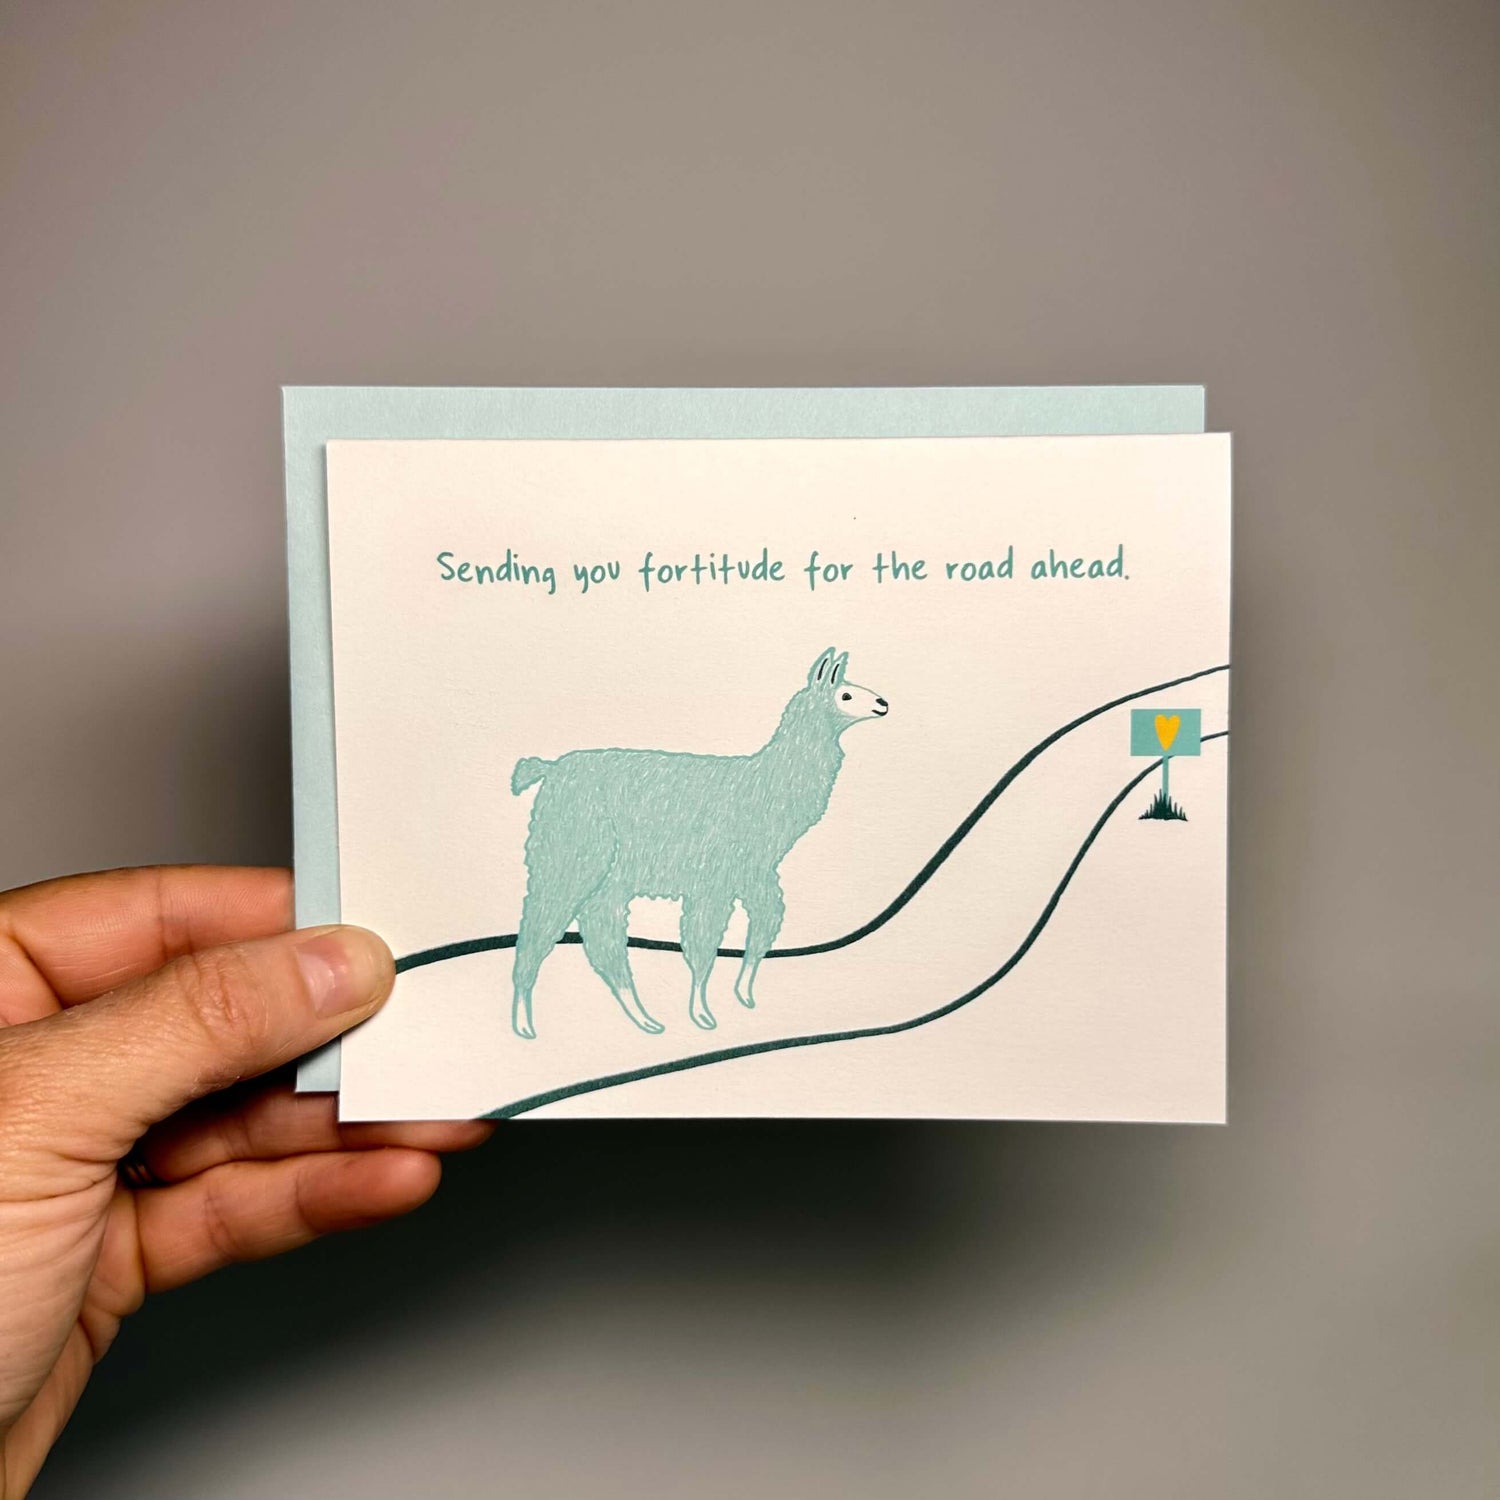 Card with a llama walking down the road and the text "Sending you fortitude for the road ahead."